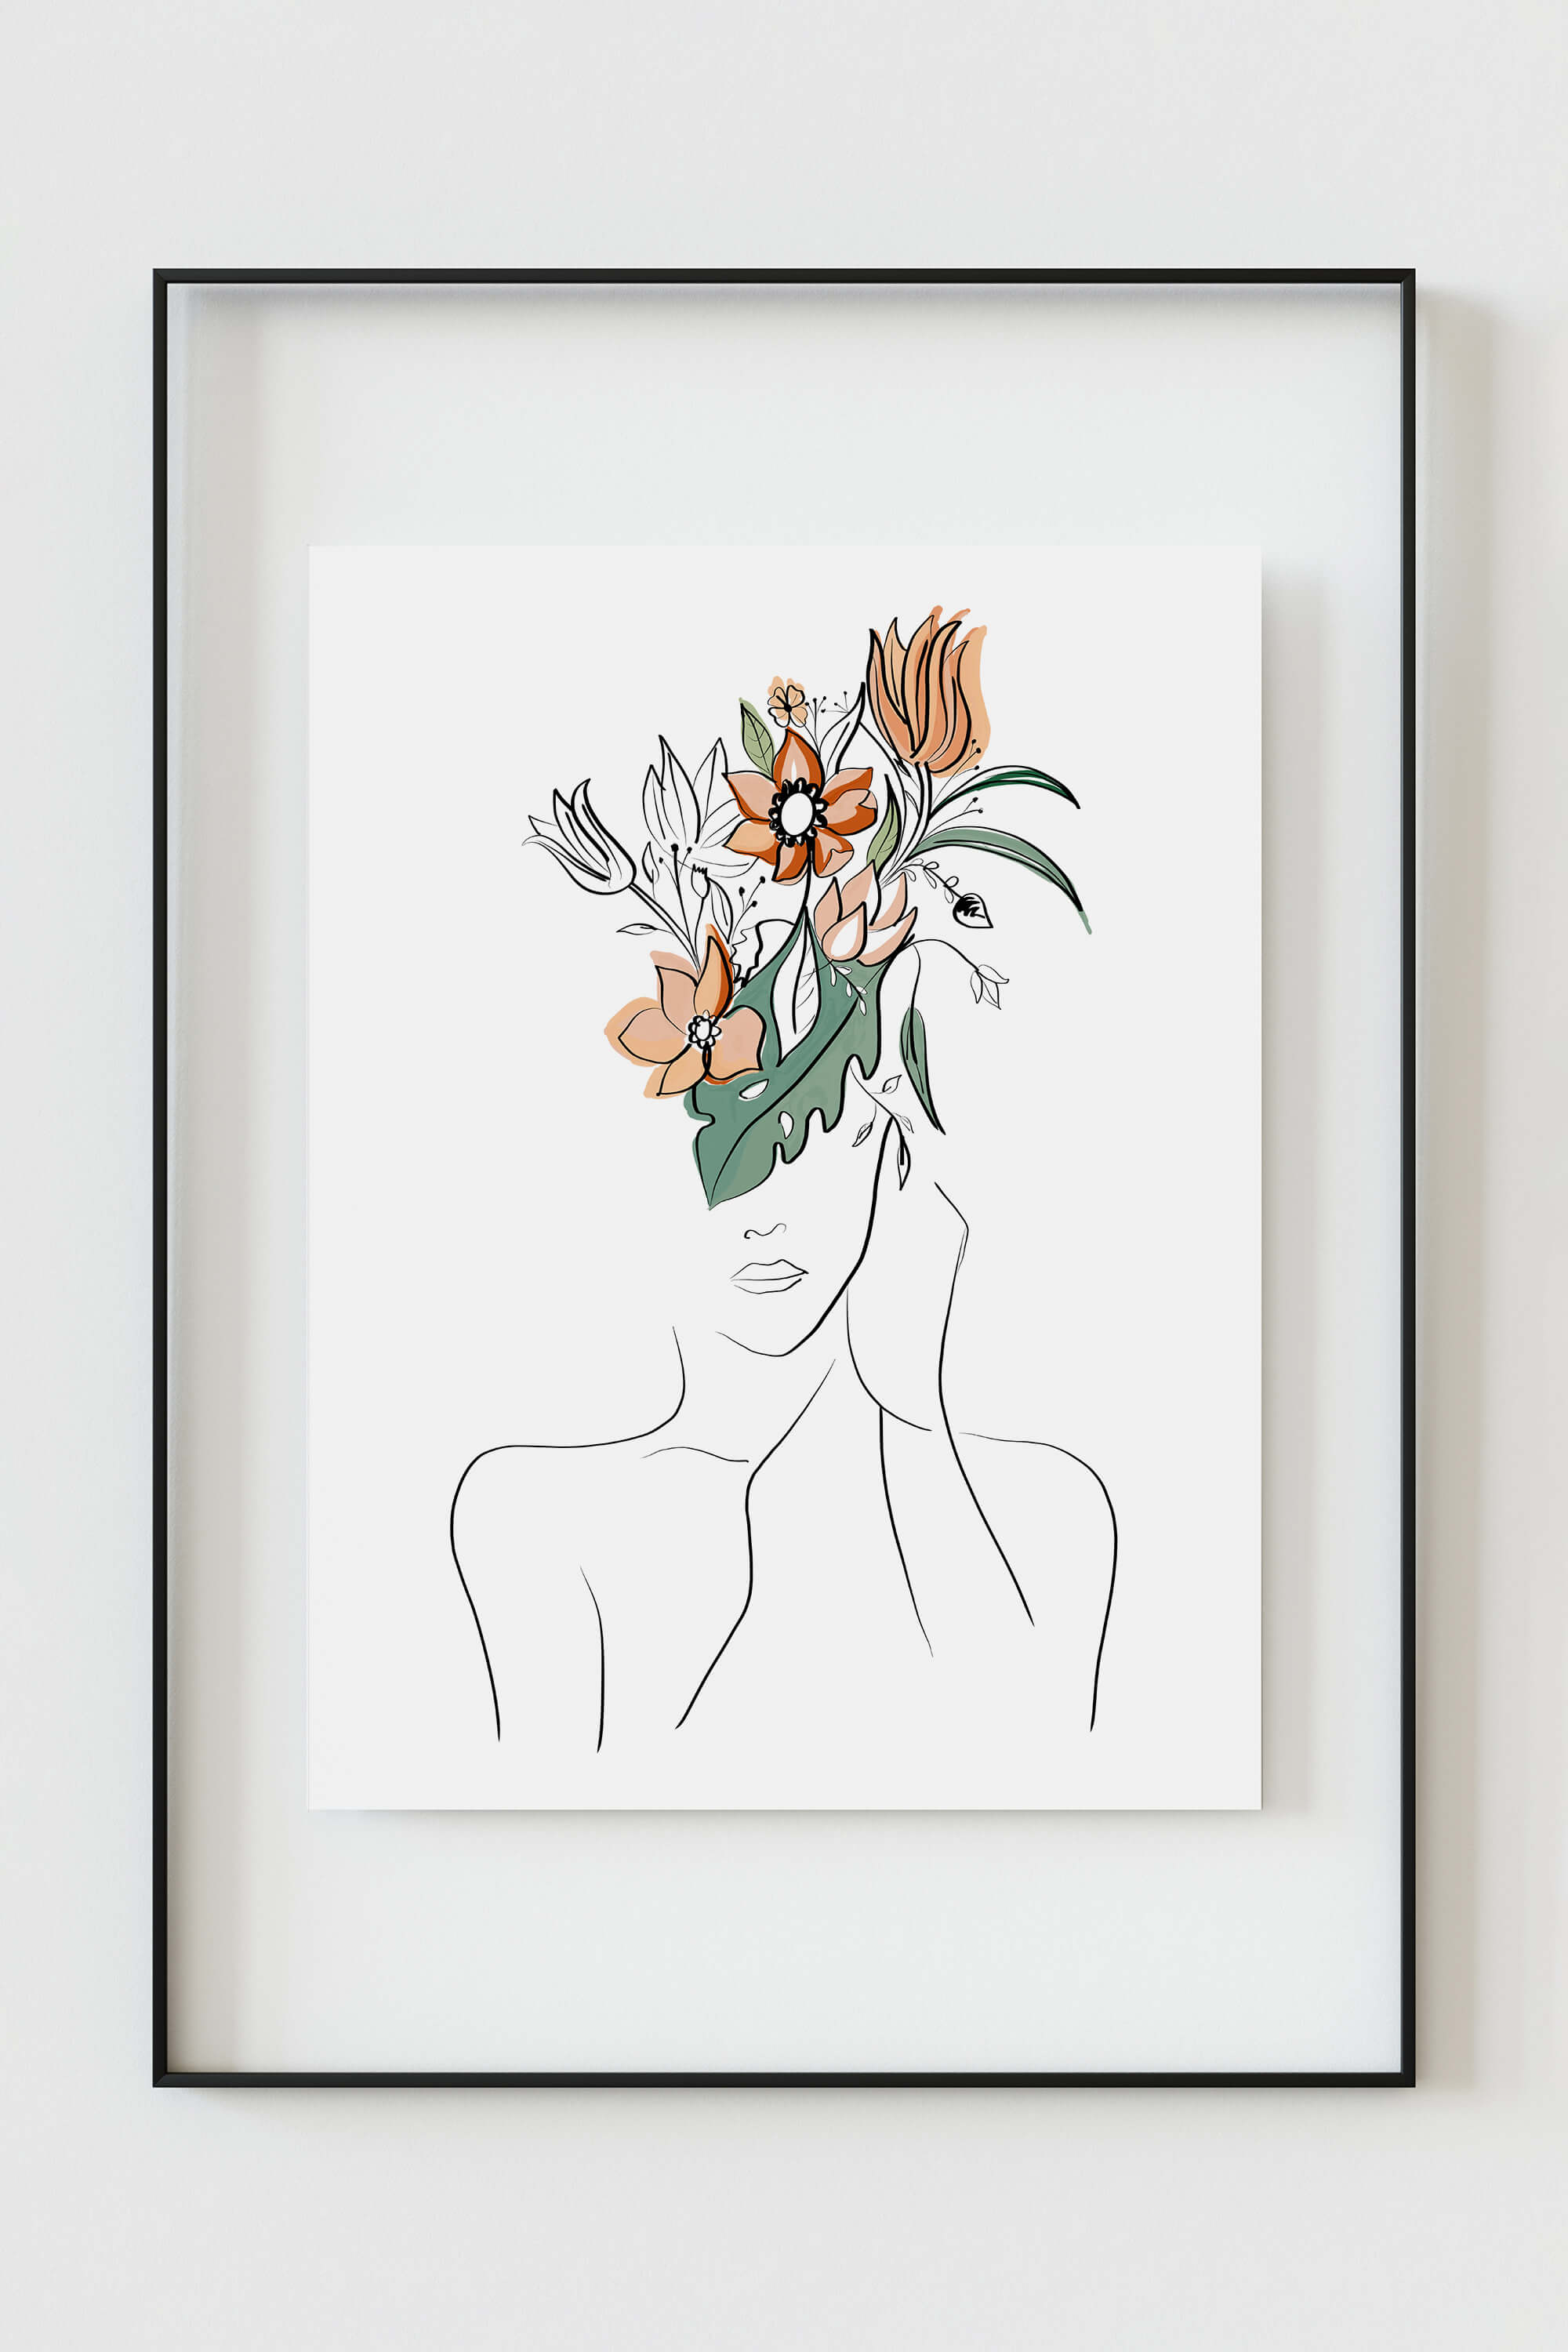 Elegant Feminine Figure Floral Art Print with abstract woman and flower head, perfect for contemporary wall styling.